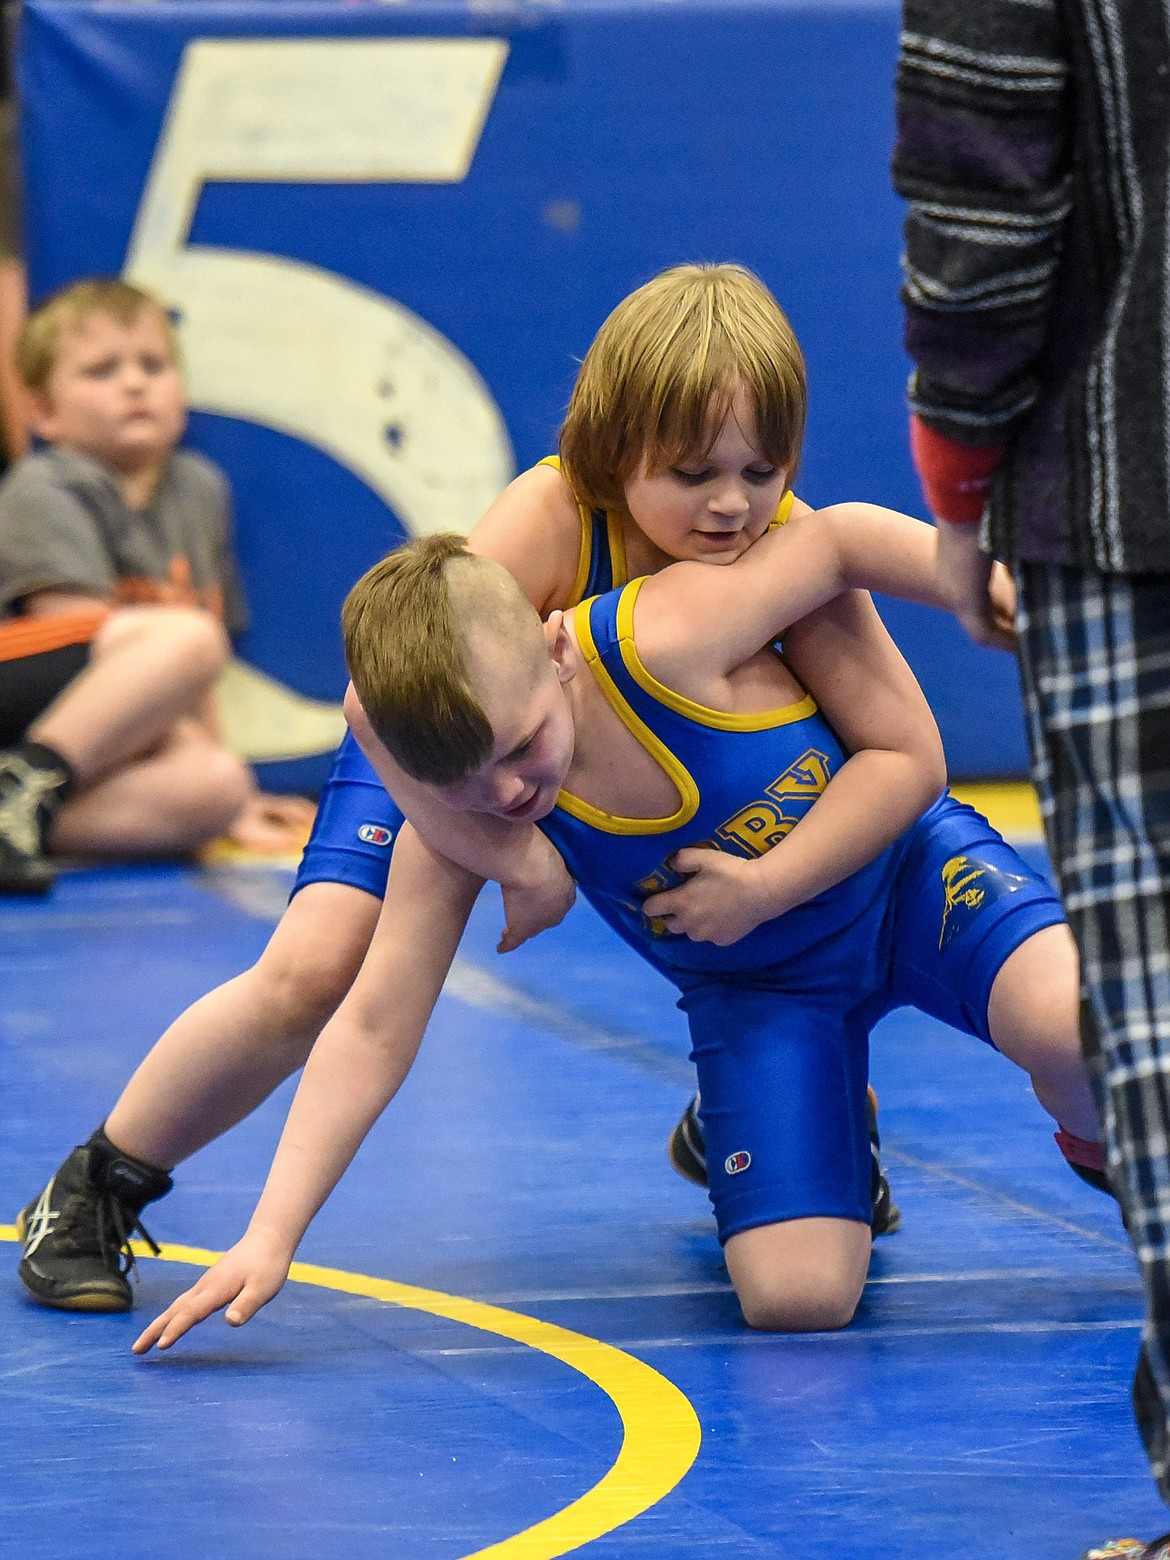 Tristan Tracy of Libby works to get a hold on Isaiah Daggett of Libby at the Kootenai Klassic Wrestling Tournament Saturday. (Ben Kibbey/The Western News)